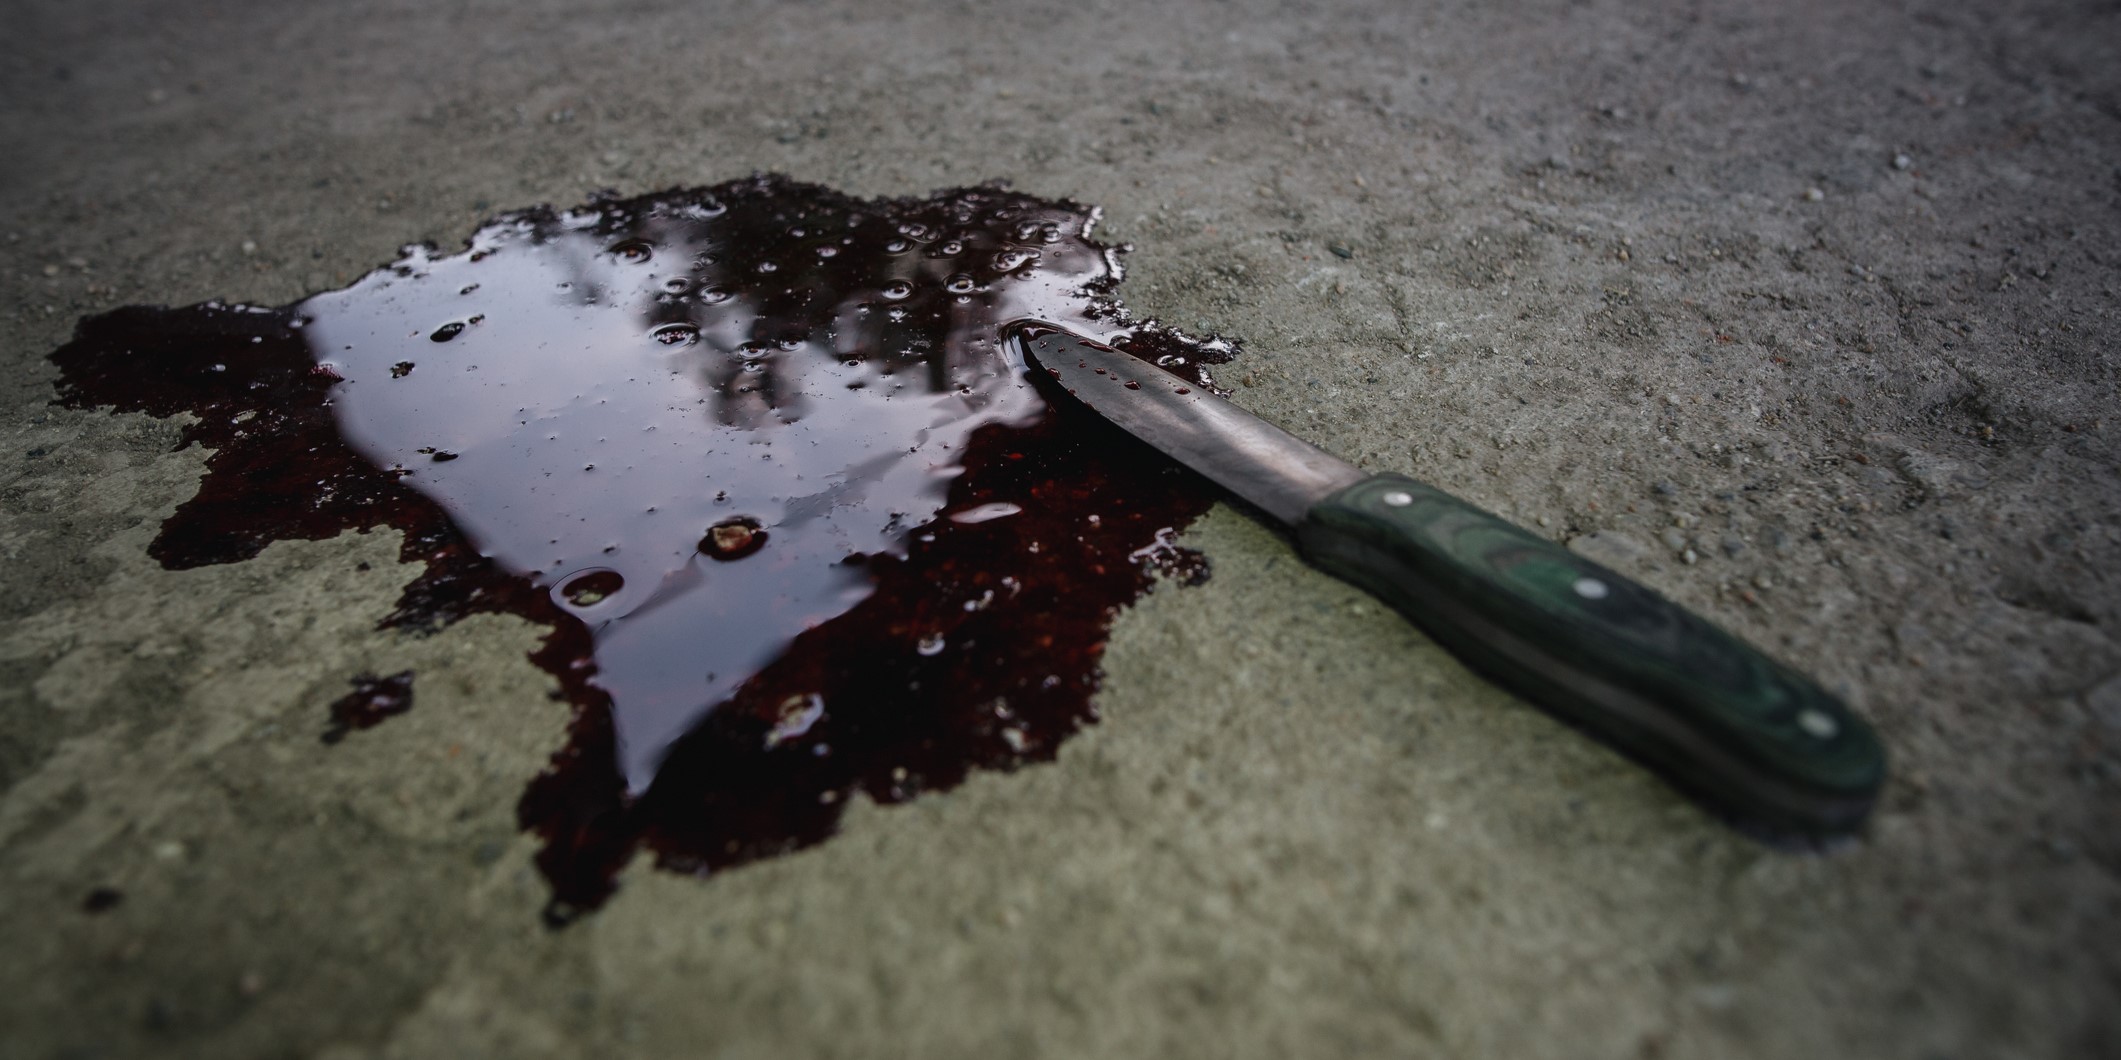 The men were stabbed when they questioned Palraj for showing them an obscene gesture. (iStock)